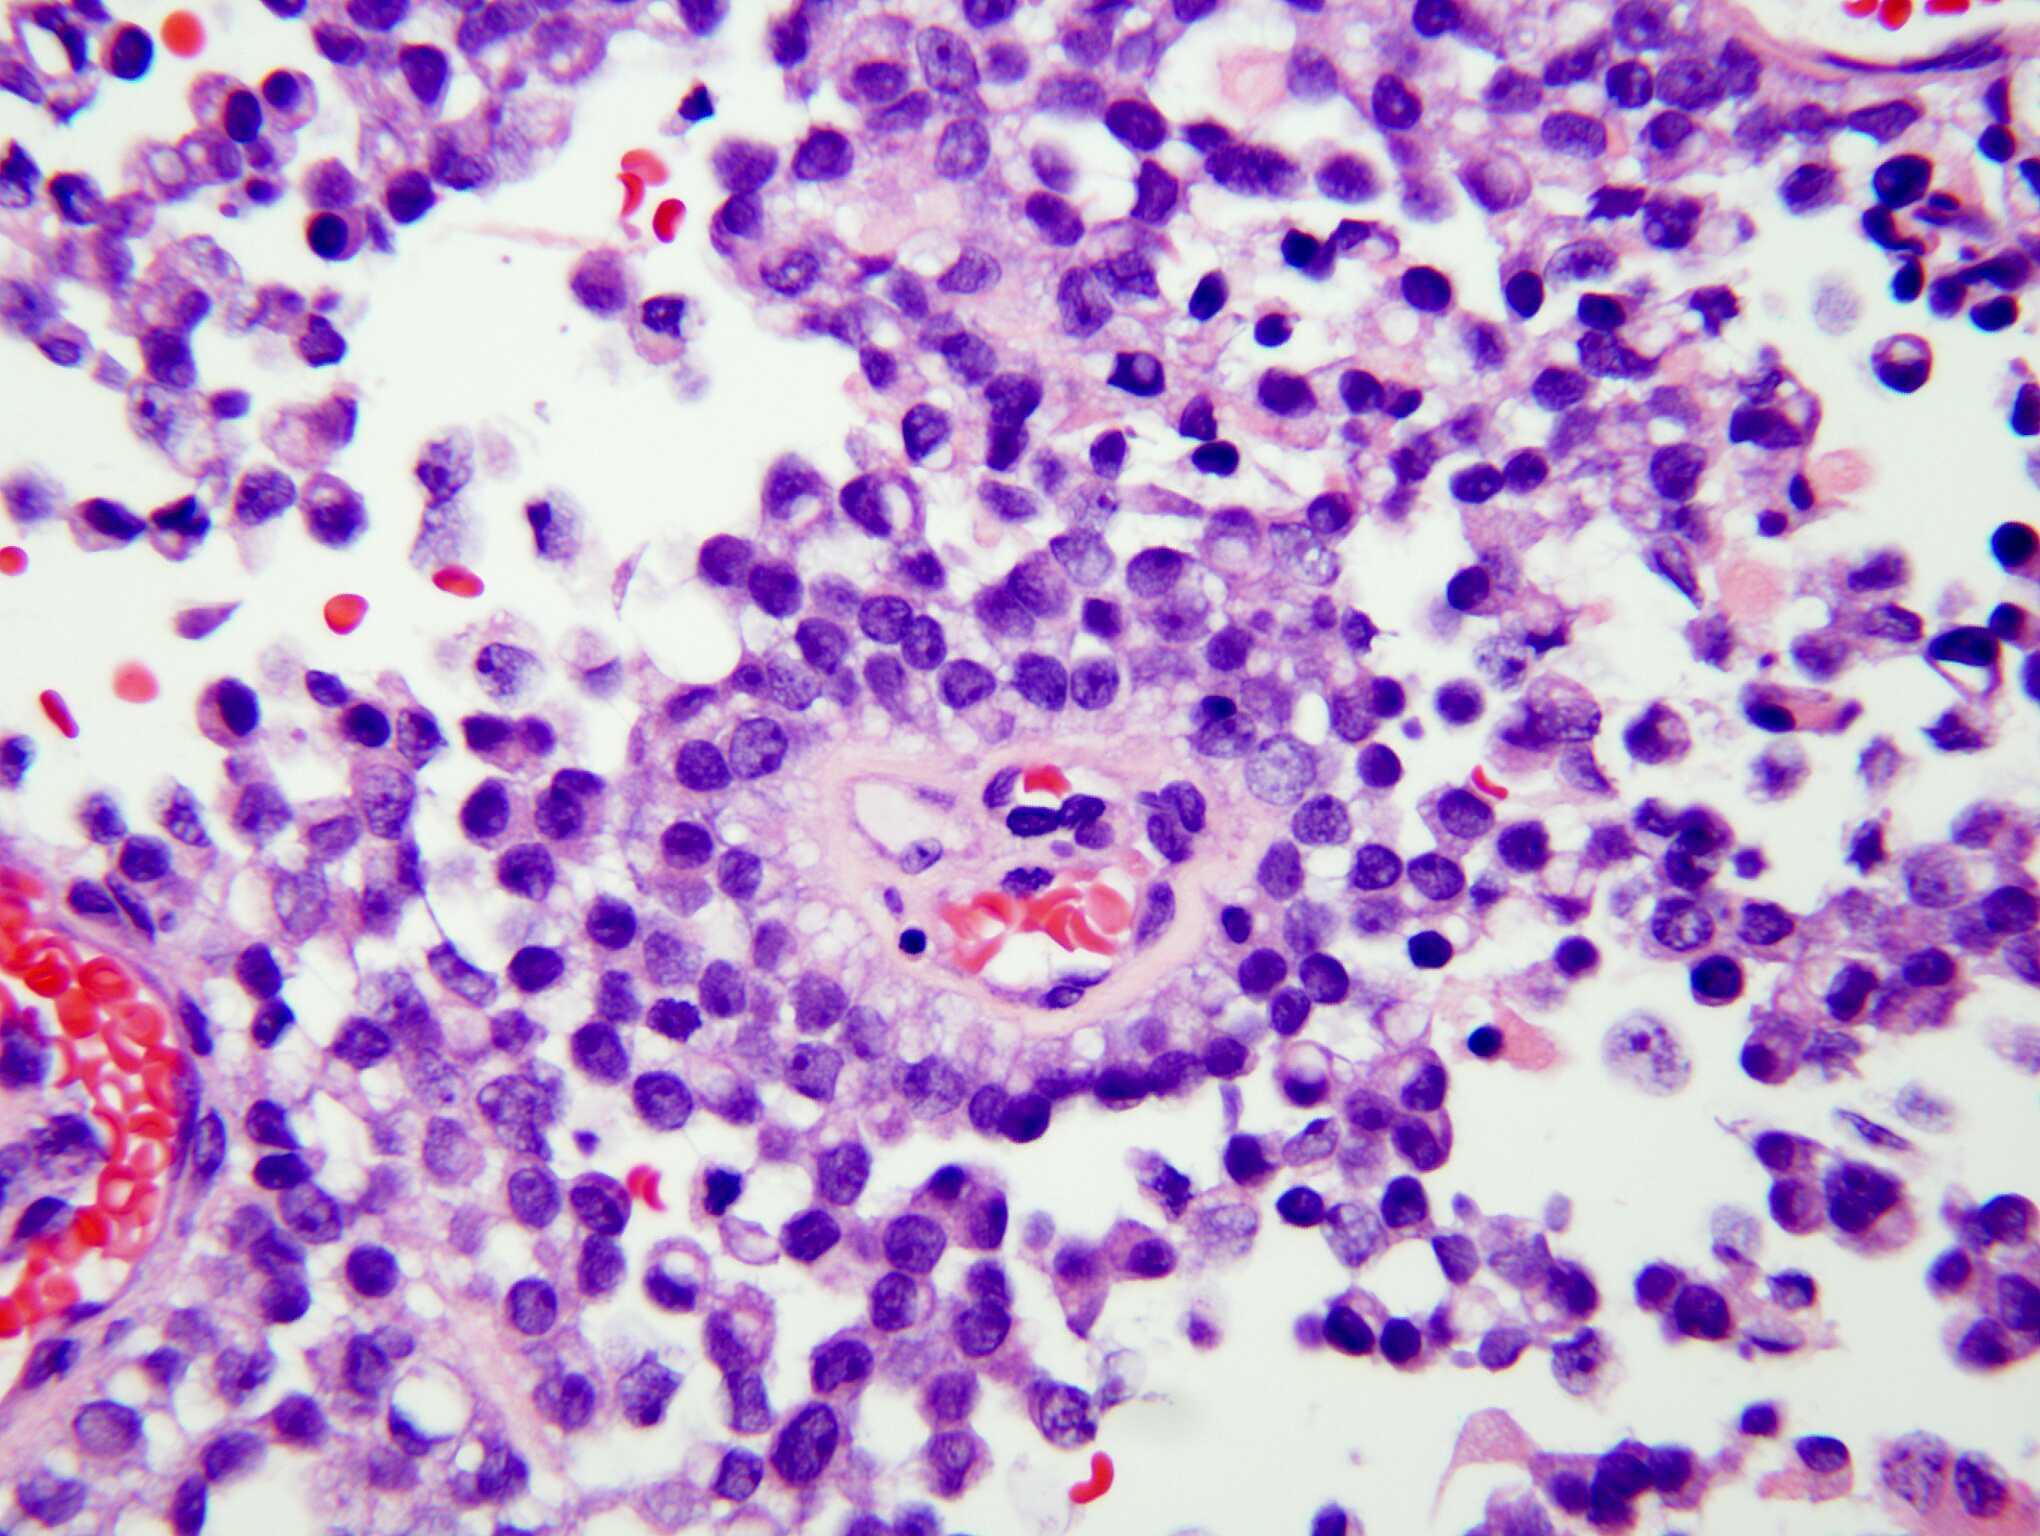 Papillary tumor of the pineal region, H&E stain x 400